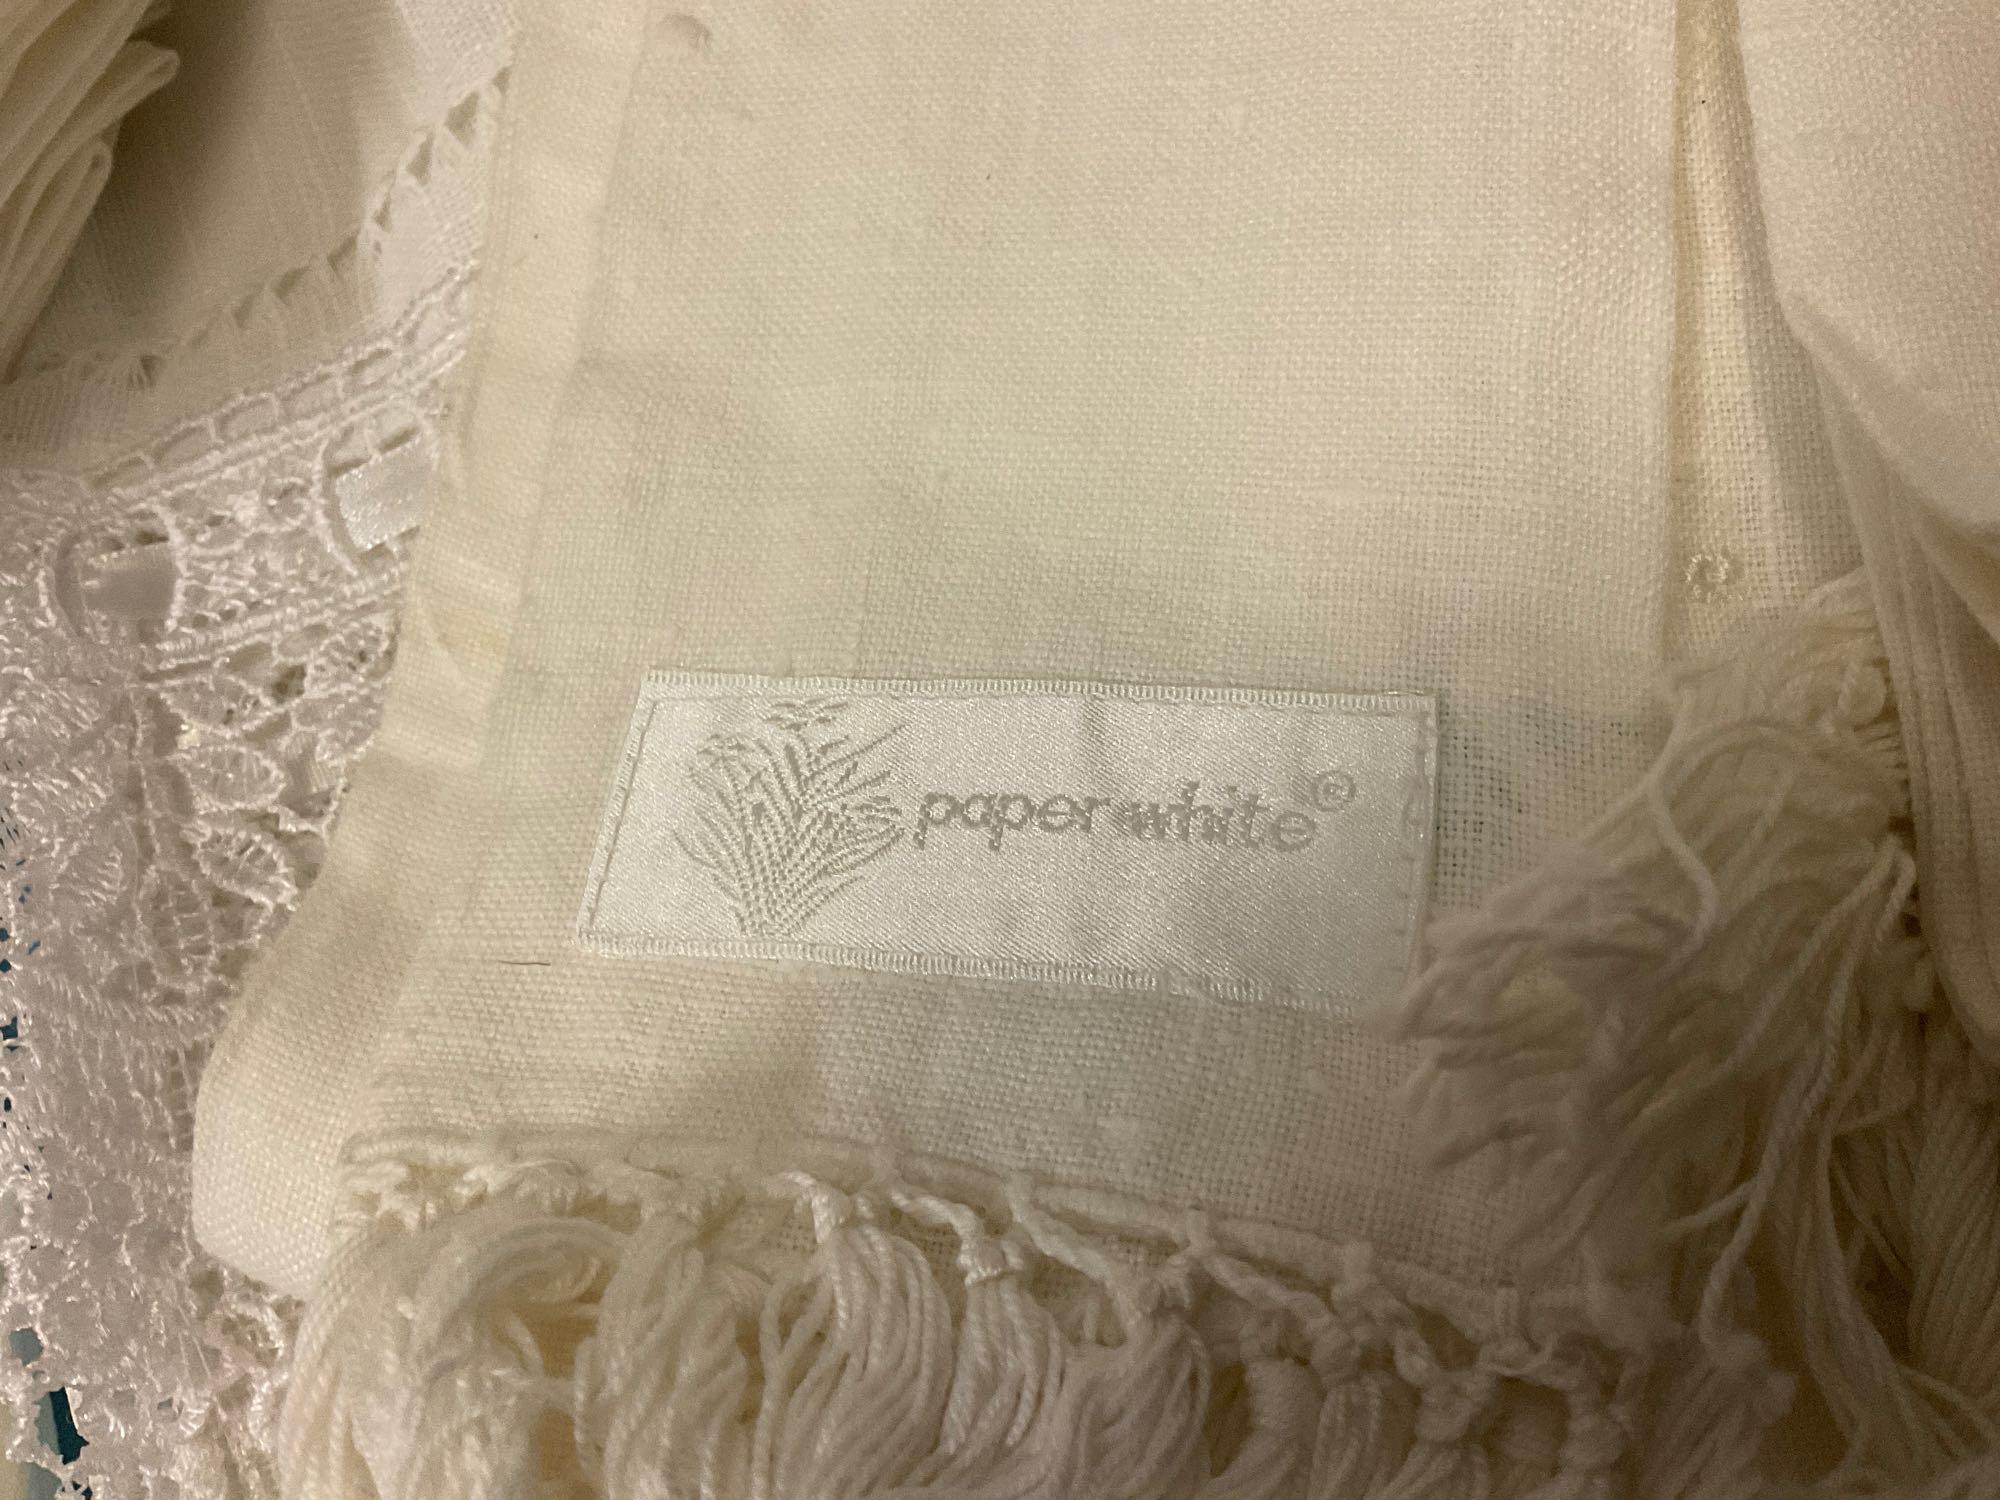 Large lot of antique linens, French linen tablecloths, many styles, see pics.